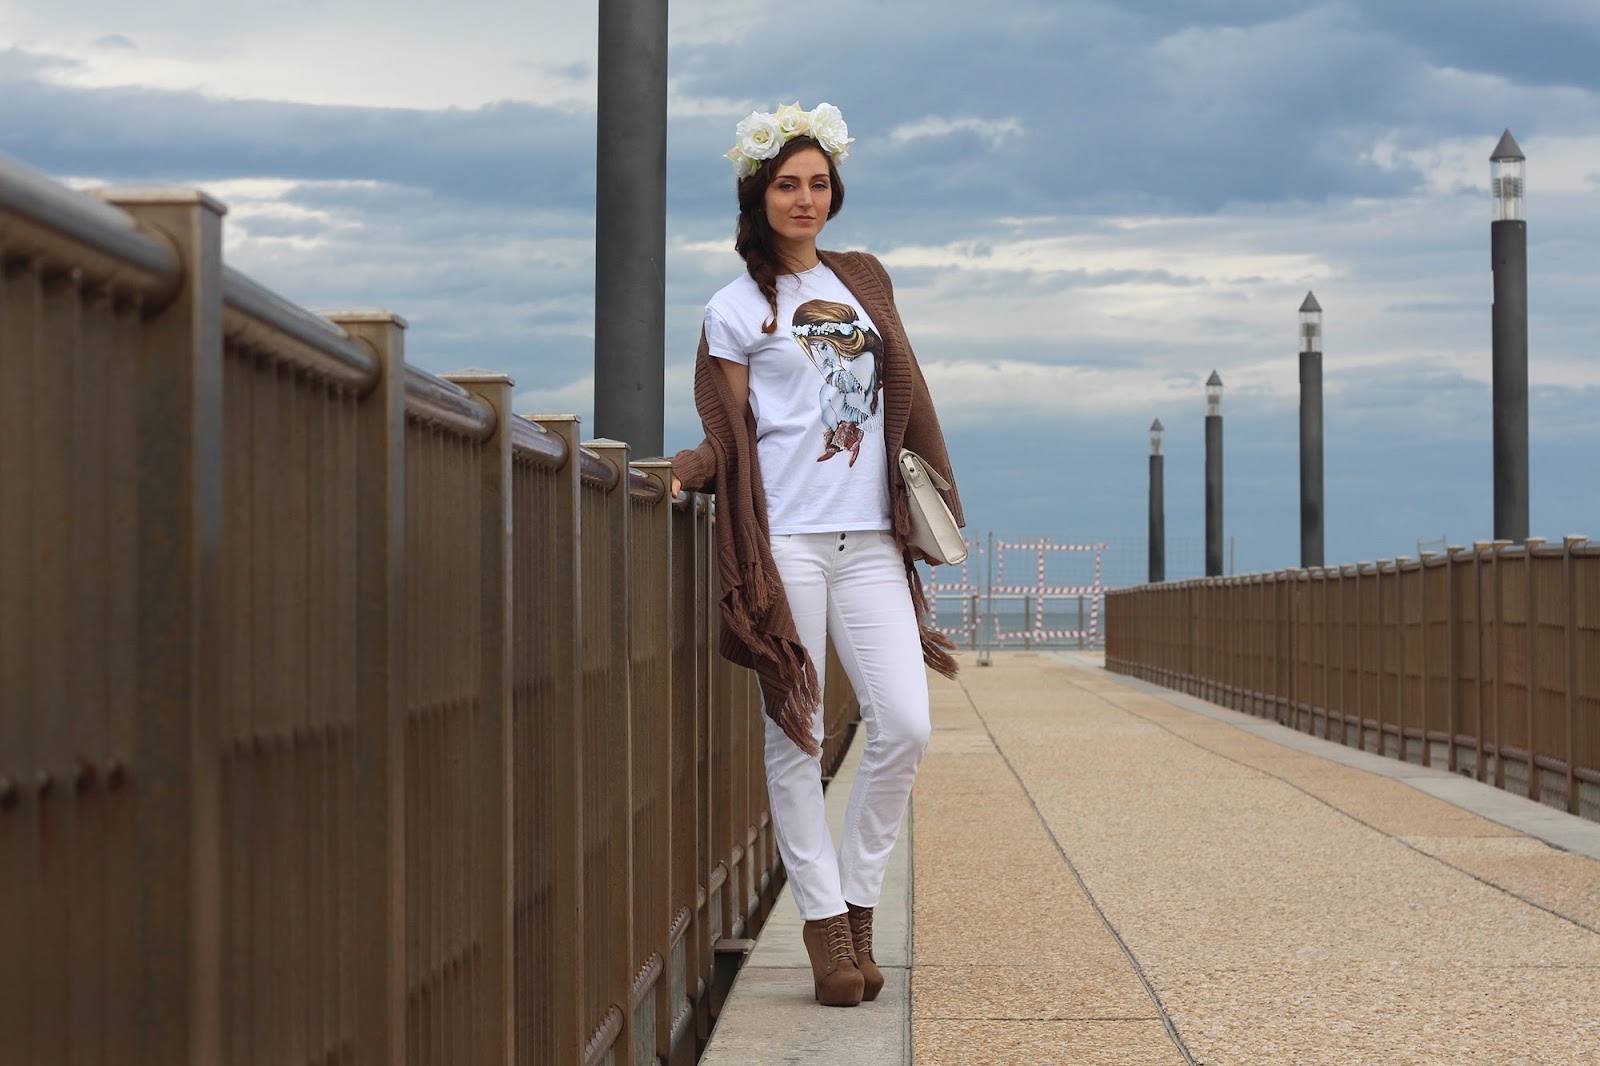 fashion blogger pescara girl italian style outfit floral crown siamoises t-shirt white brown jeffry campbell